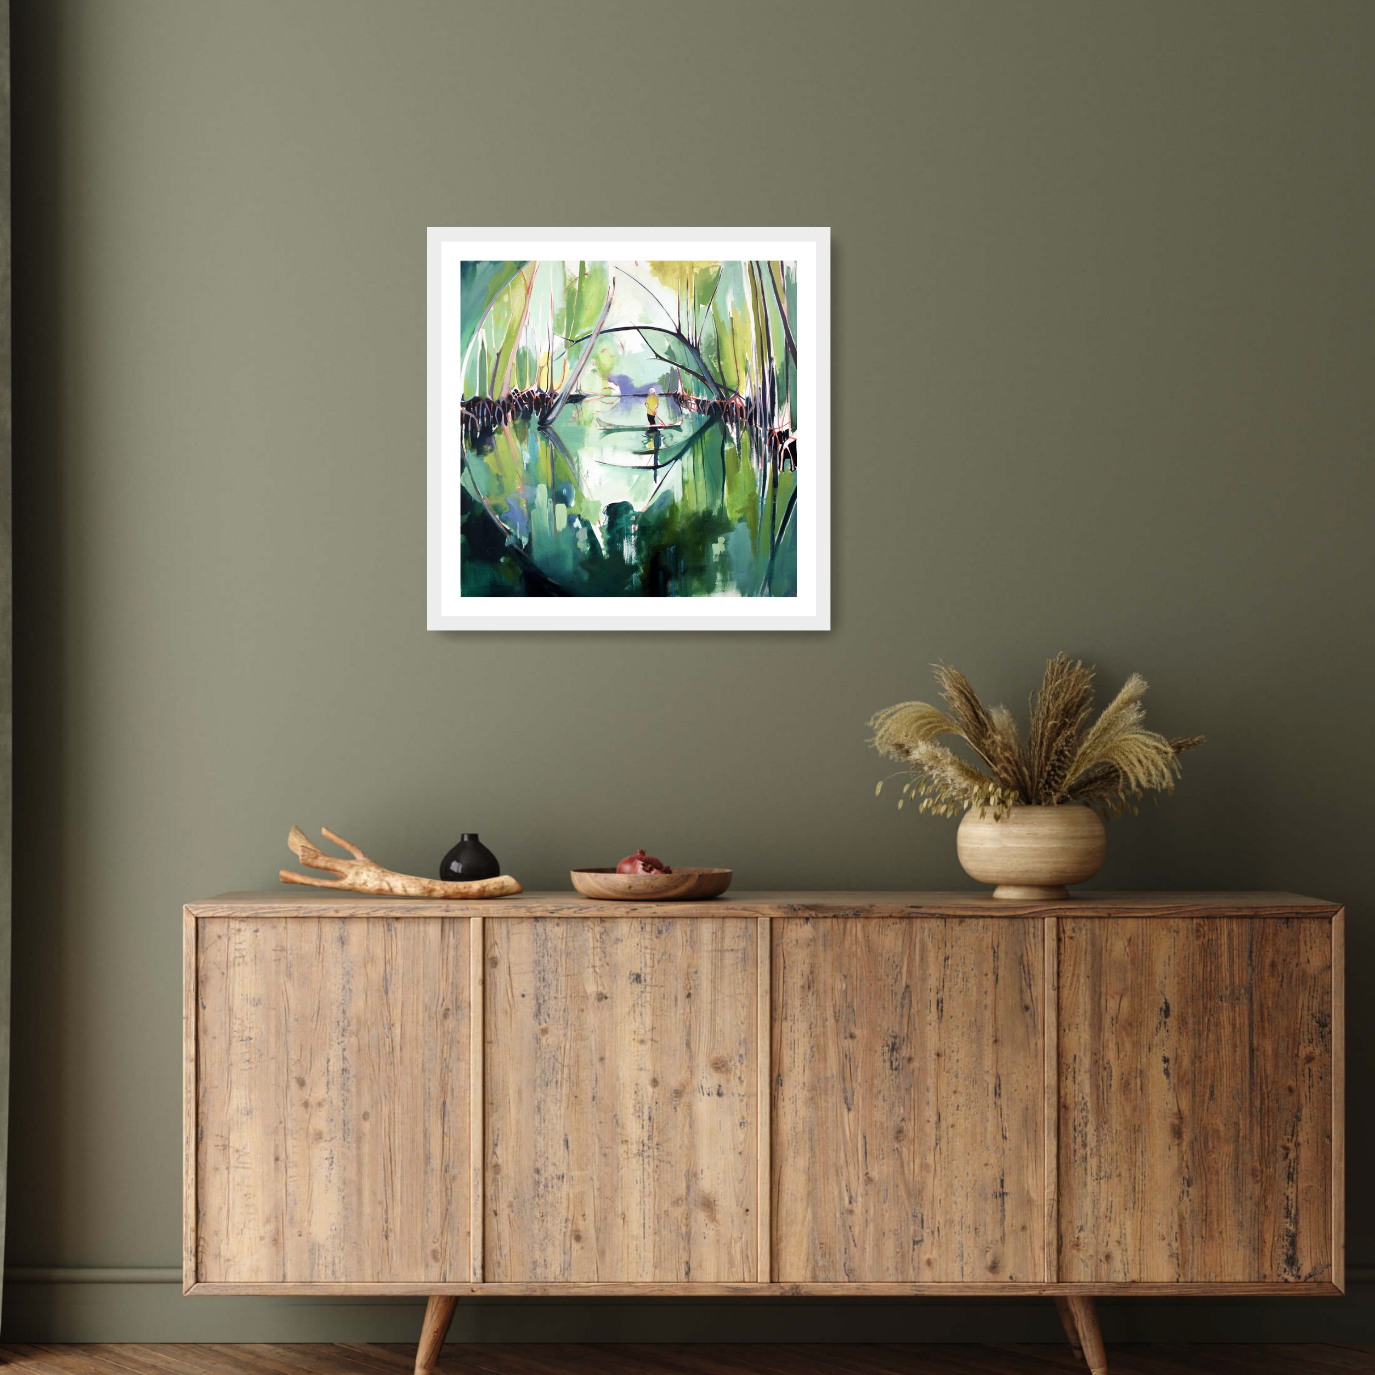 Set in an elegant interior the white framed print ‘Reflected’ by Charlotte Evans: A vibrant contemporary landscape where the multicoloured hues of mangroves are beautifully reflected in the tranquil waters